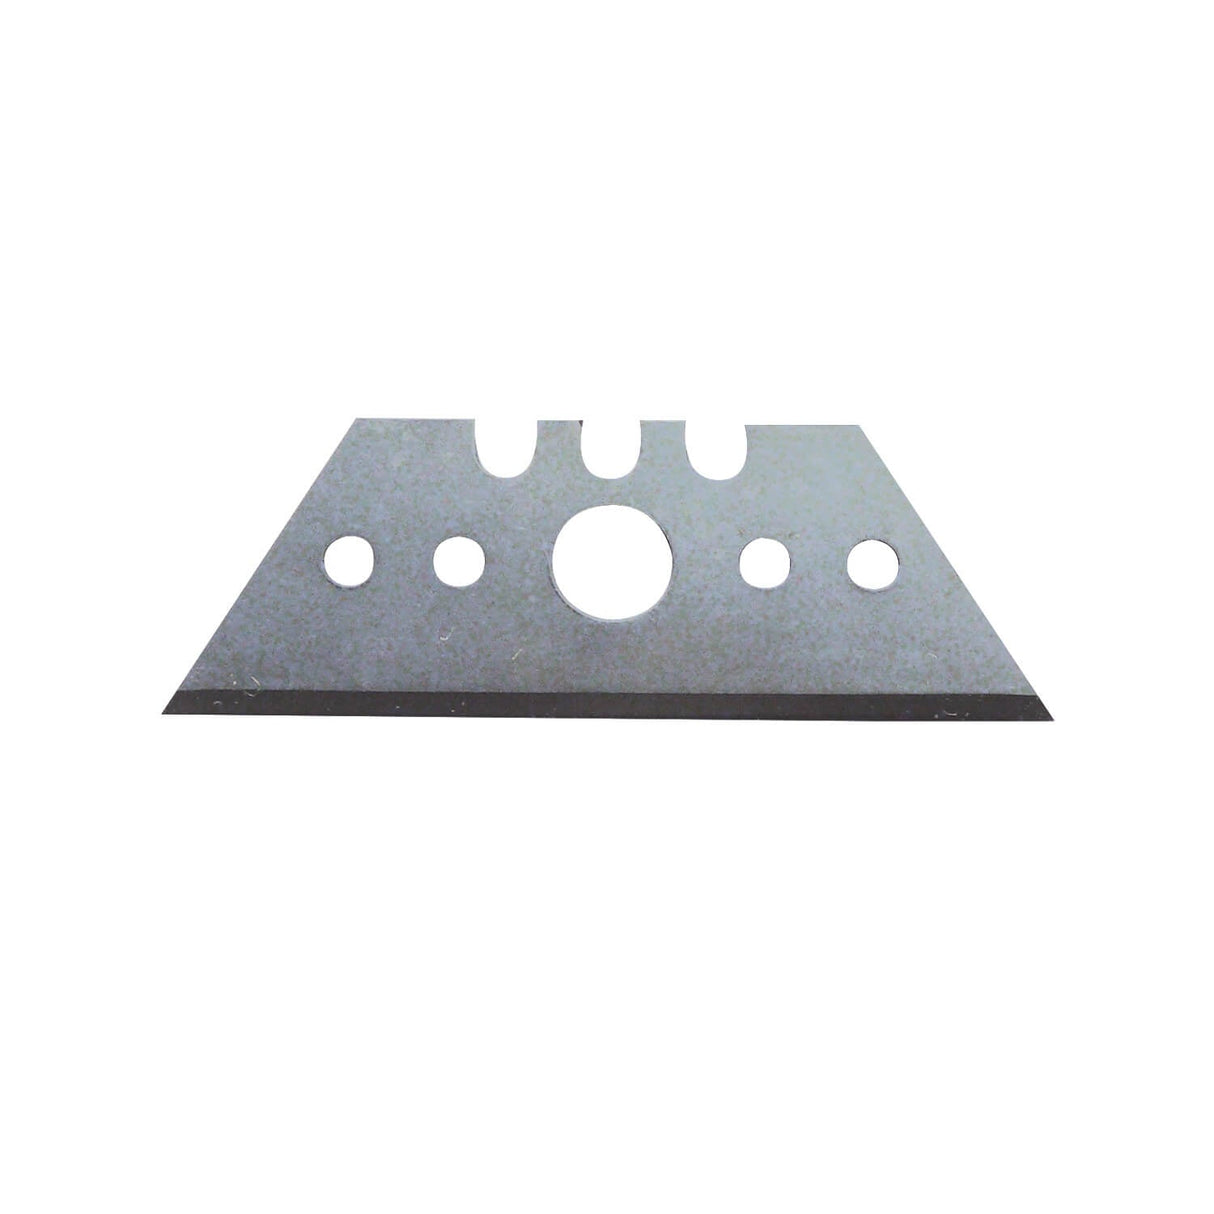 KN90 Replacement Blades for KN10 & KN20 (Pk10)